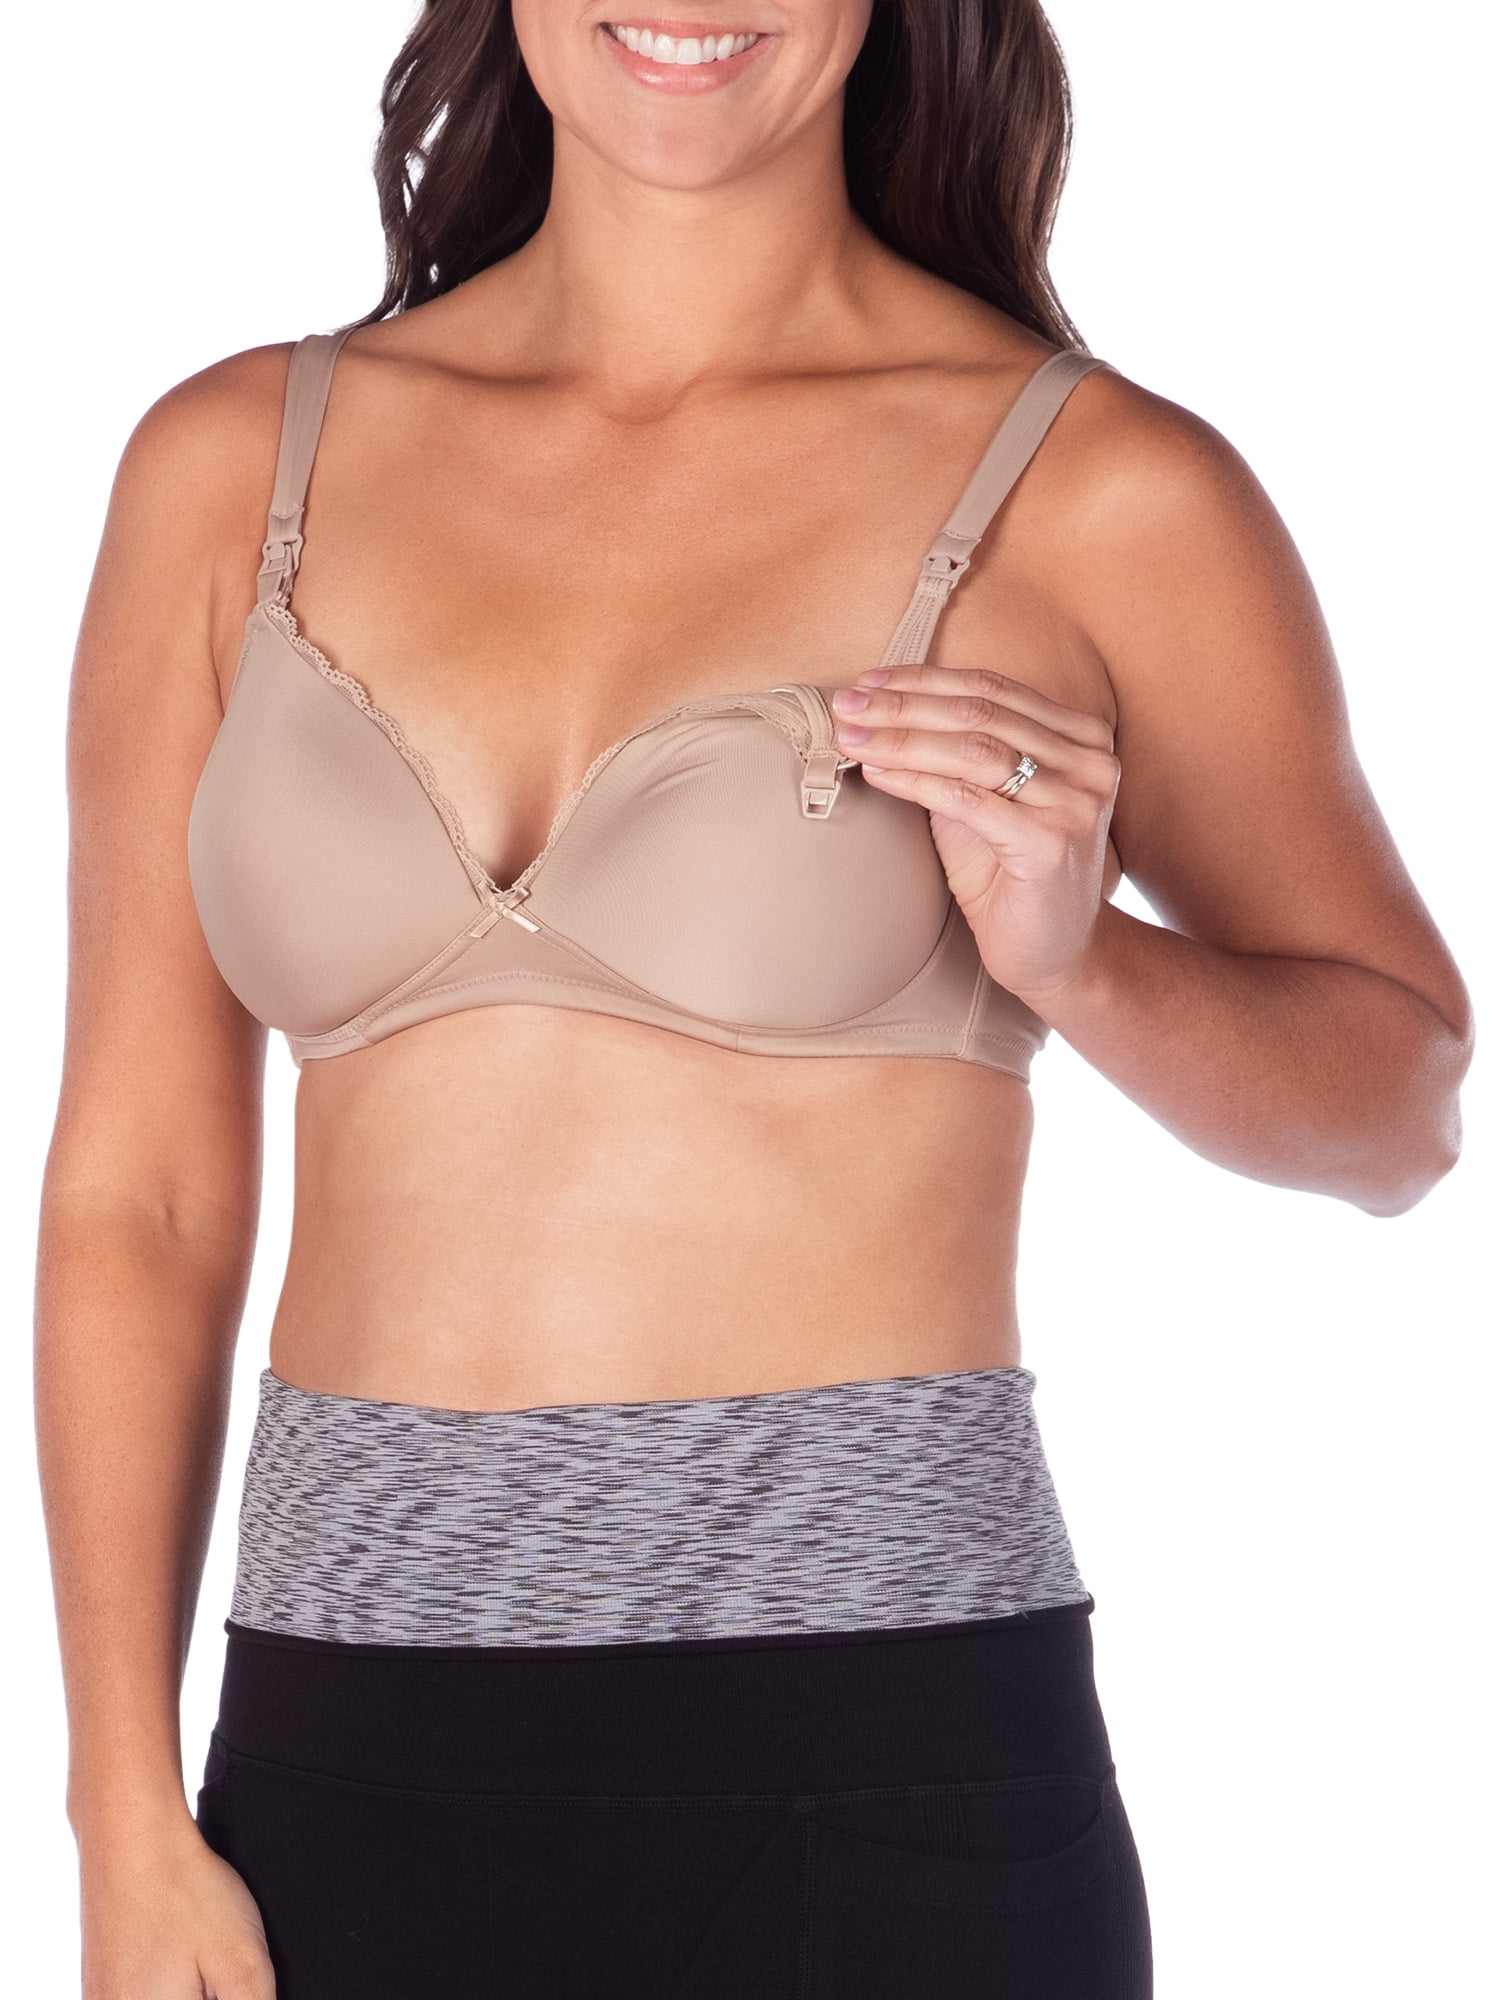 Buy Loving Moments by Leading Lady Women's Full Coverage T-Shirt Nursing Bra,  Warm Taupe, 42C at